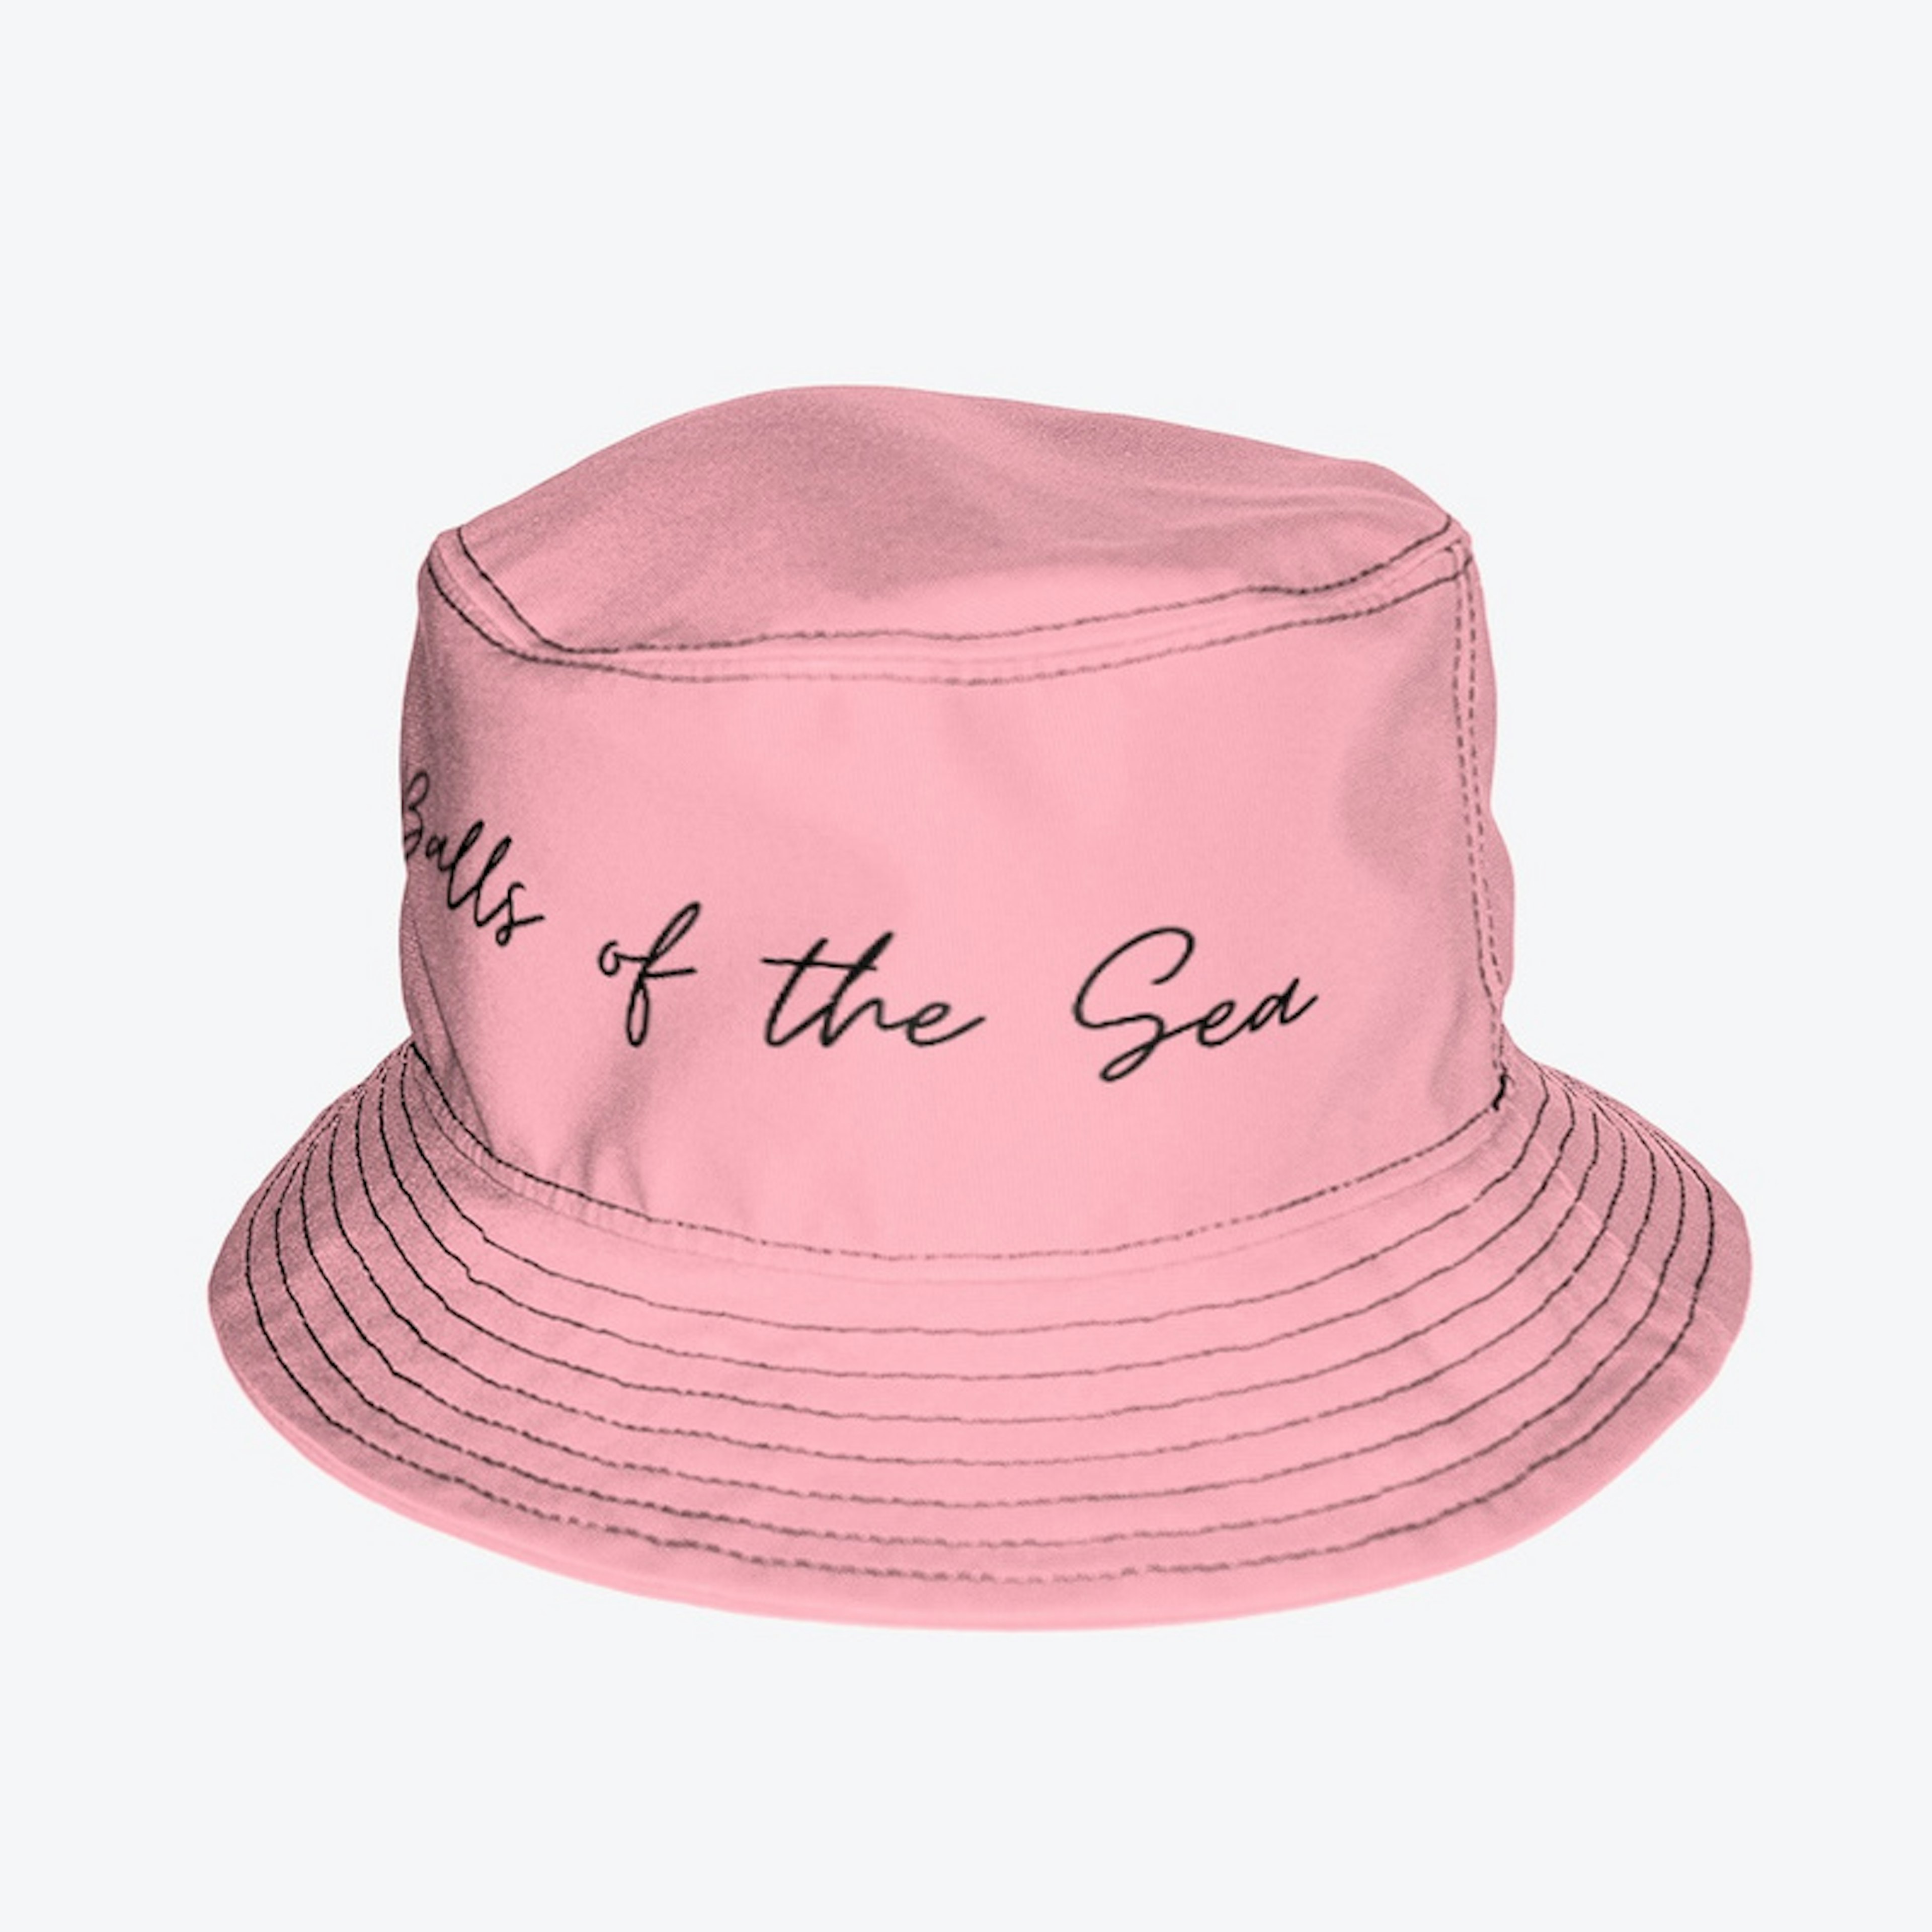 PINK-Cotton Balls of the Sea